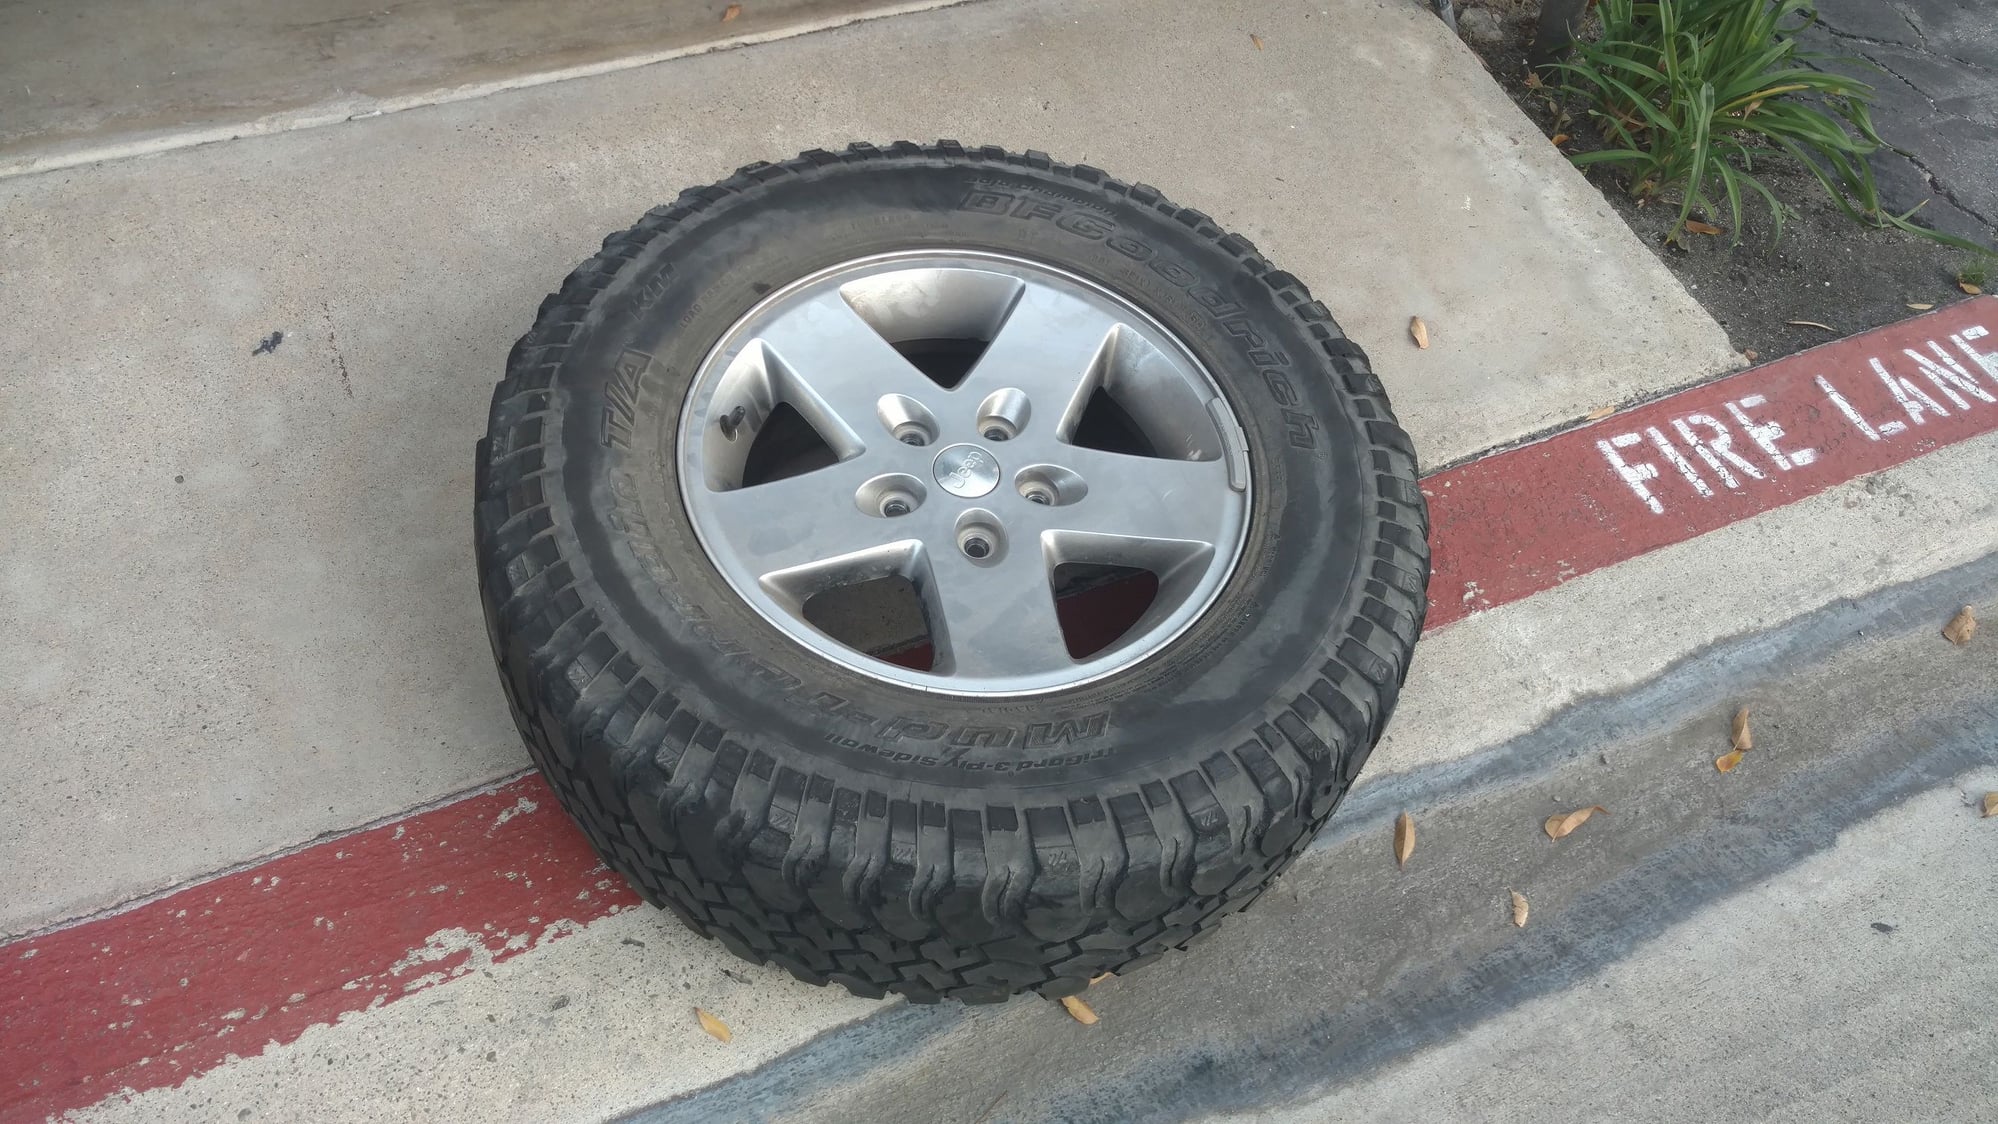 Miscellaneous - Garage Clean-Out - Used - 2007 to 2018 Jeep Wrangler - Aliso Viejo, CA 92656, United States